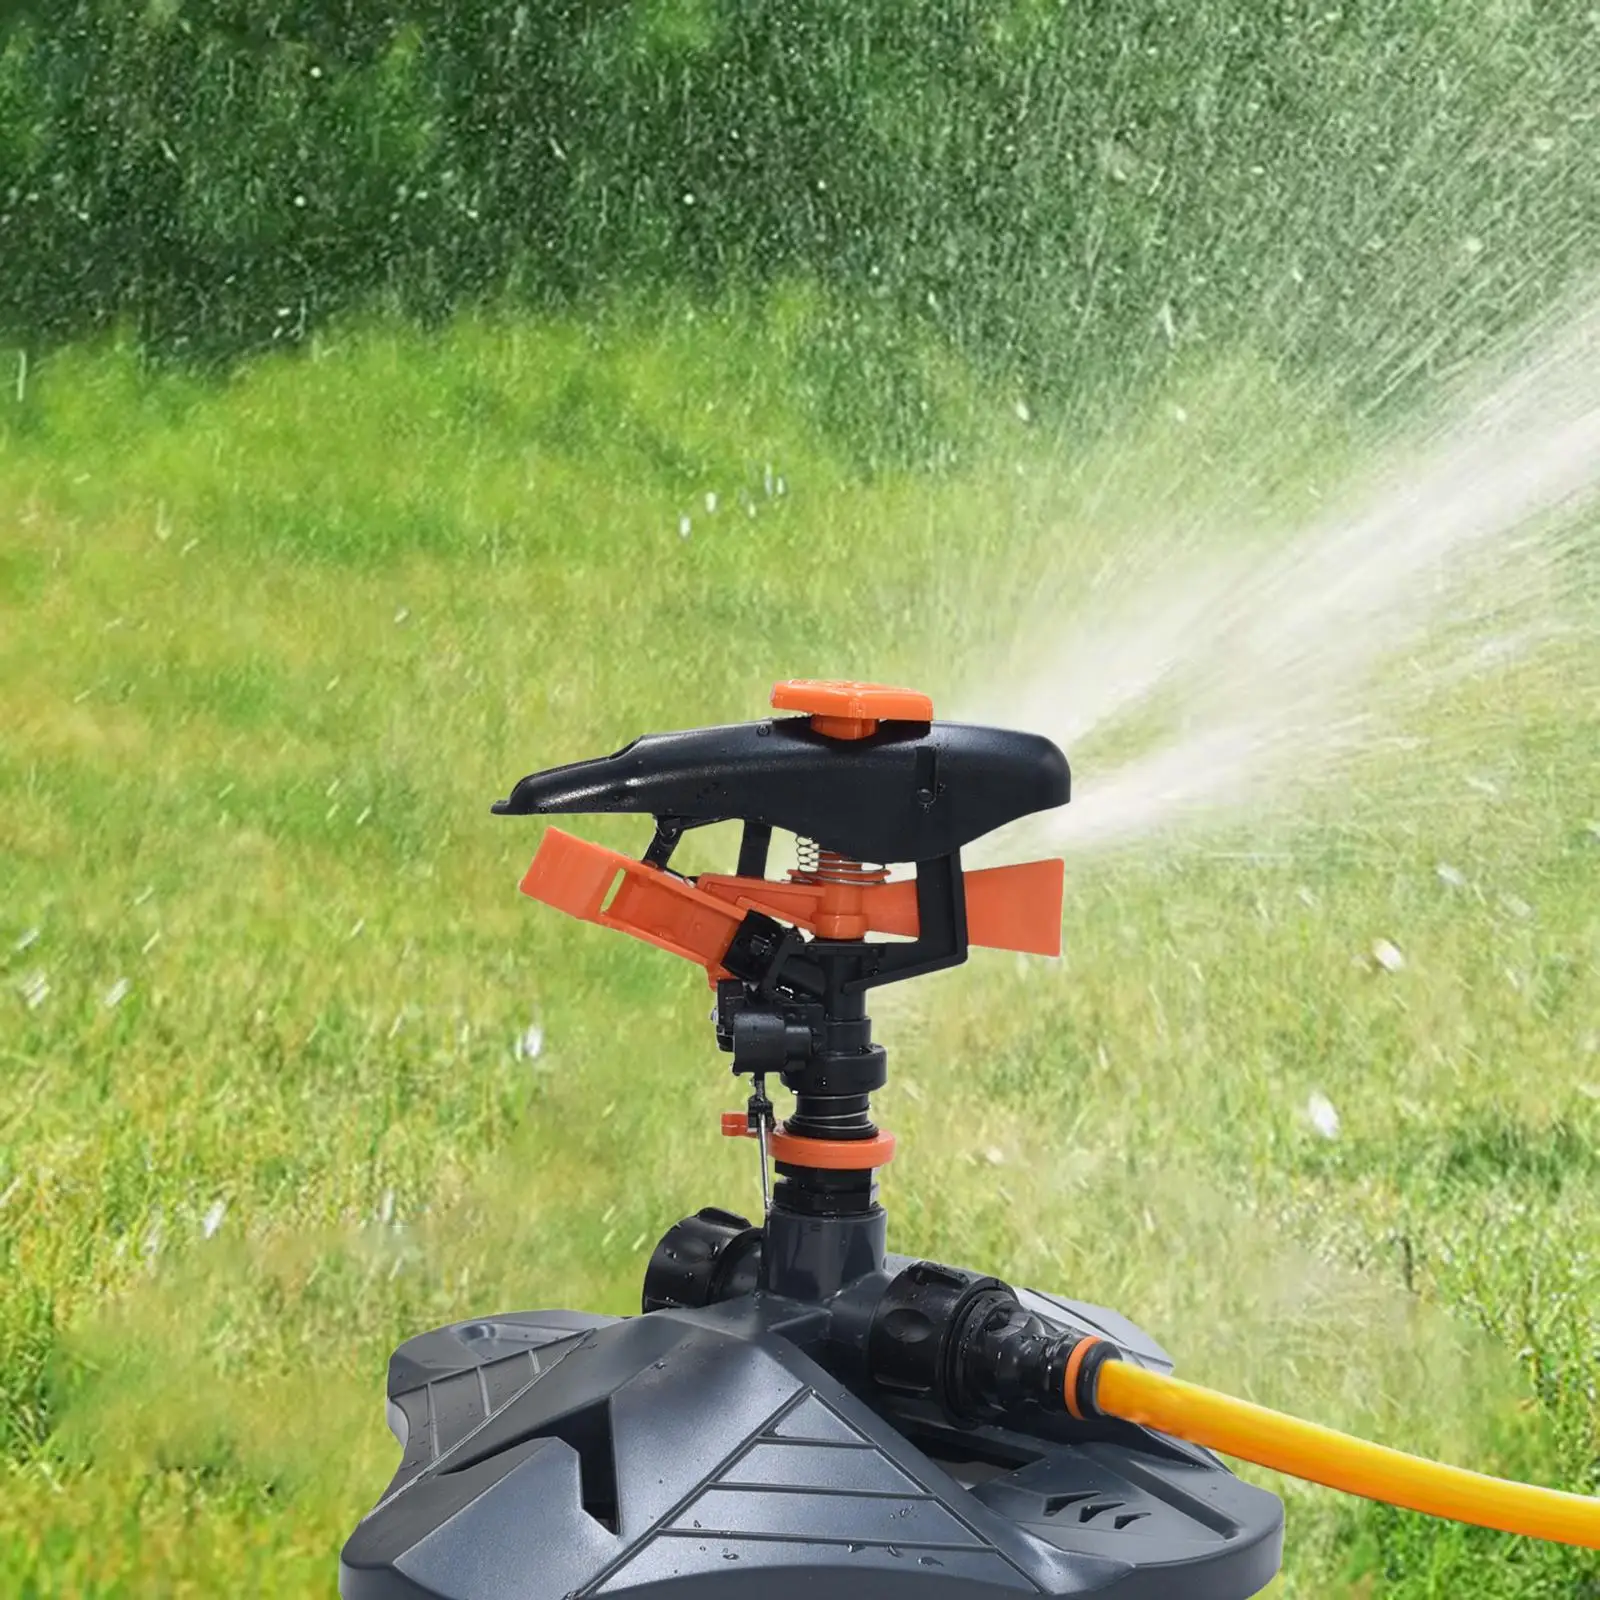 Lawn Water Sprinkler Upgrade 360 Degree Large Area Coverag Watering Grass Lawn Tool Garden Tool for Lawn Garden Plants Yard